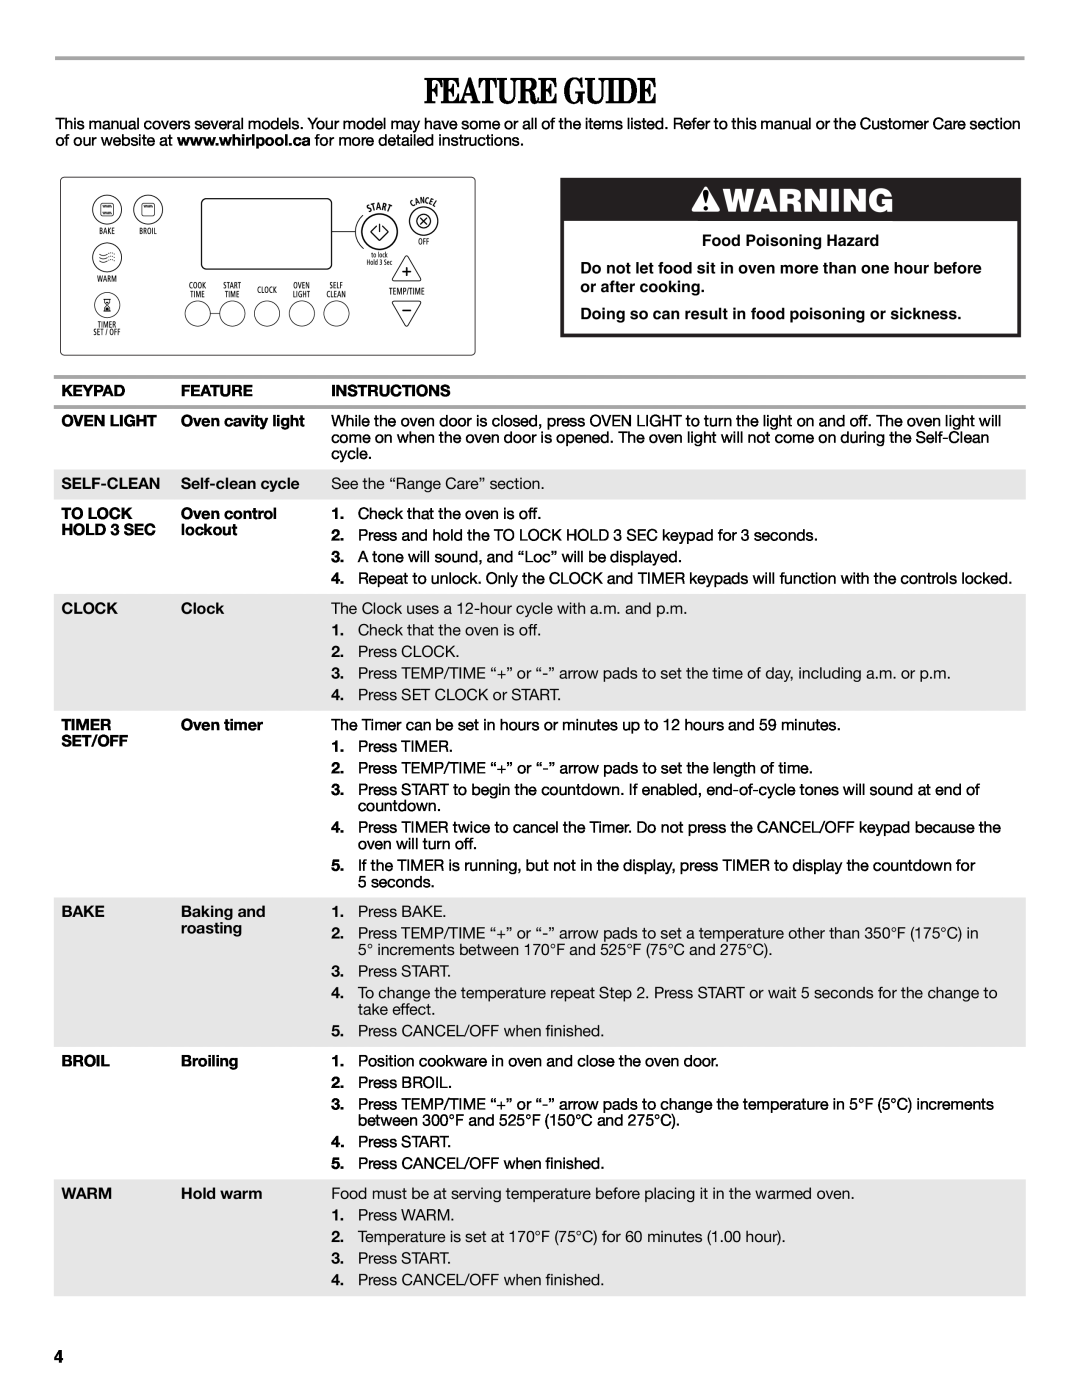 Whirlpool W10196152B warranty Feature Guide, Food Poisoning Hazard, Doing so can result in food poisoning or sickness 